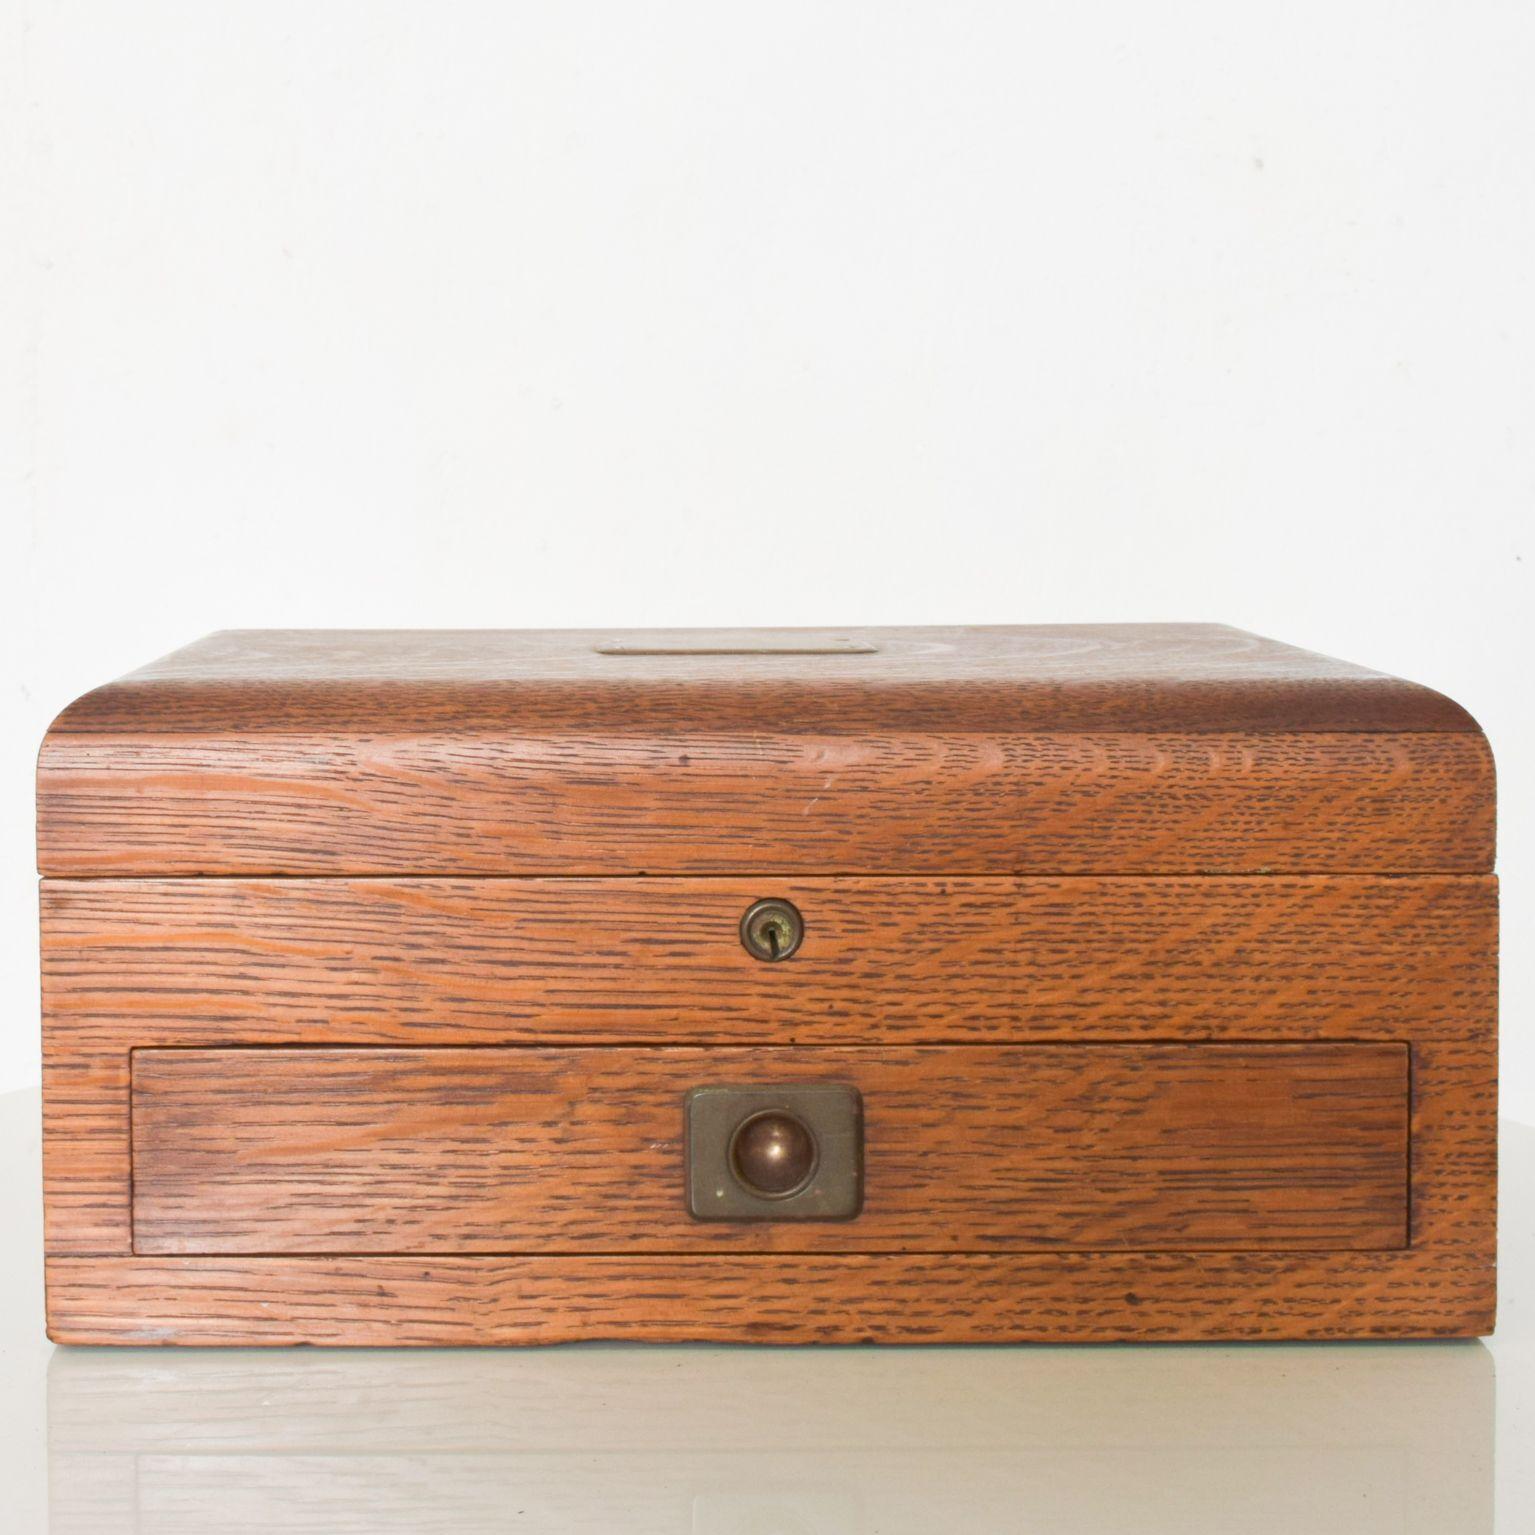 For your consideration: Antique Tiger Oak Wood Jewelry Box 
Ideal for keepsakes, money or your stash.

Dimensions: 14